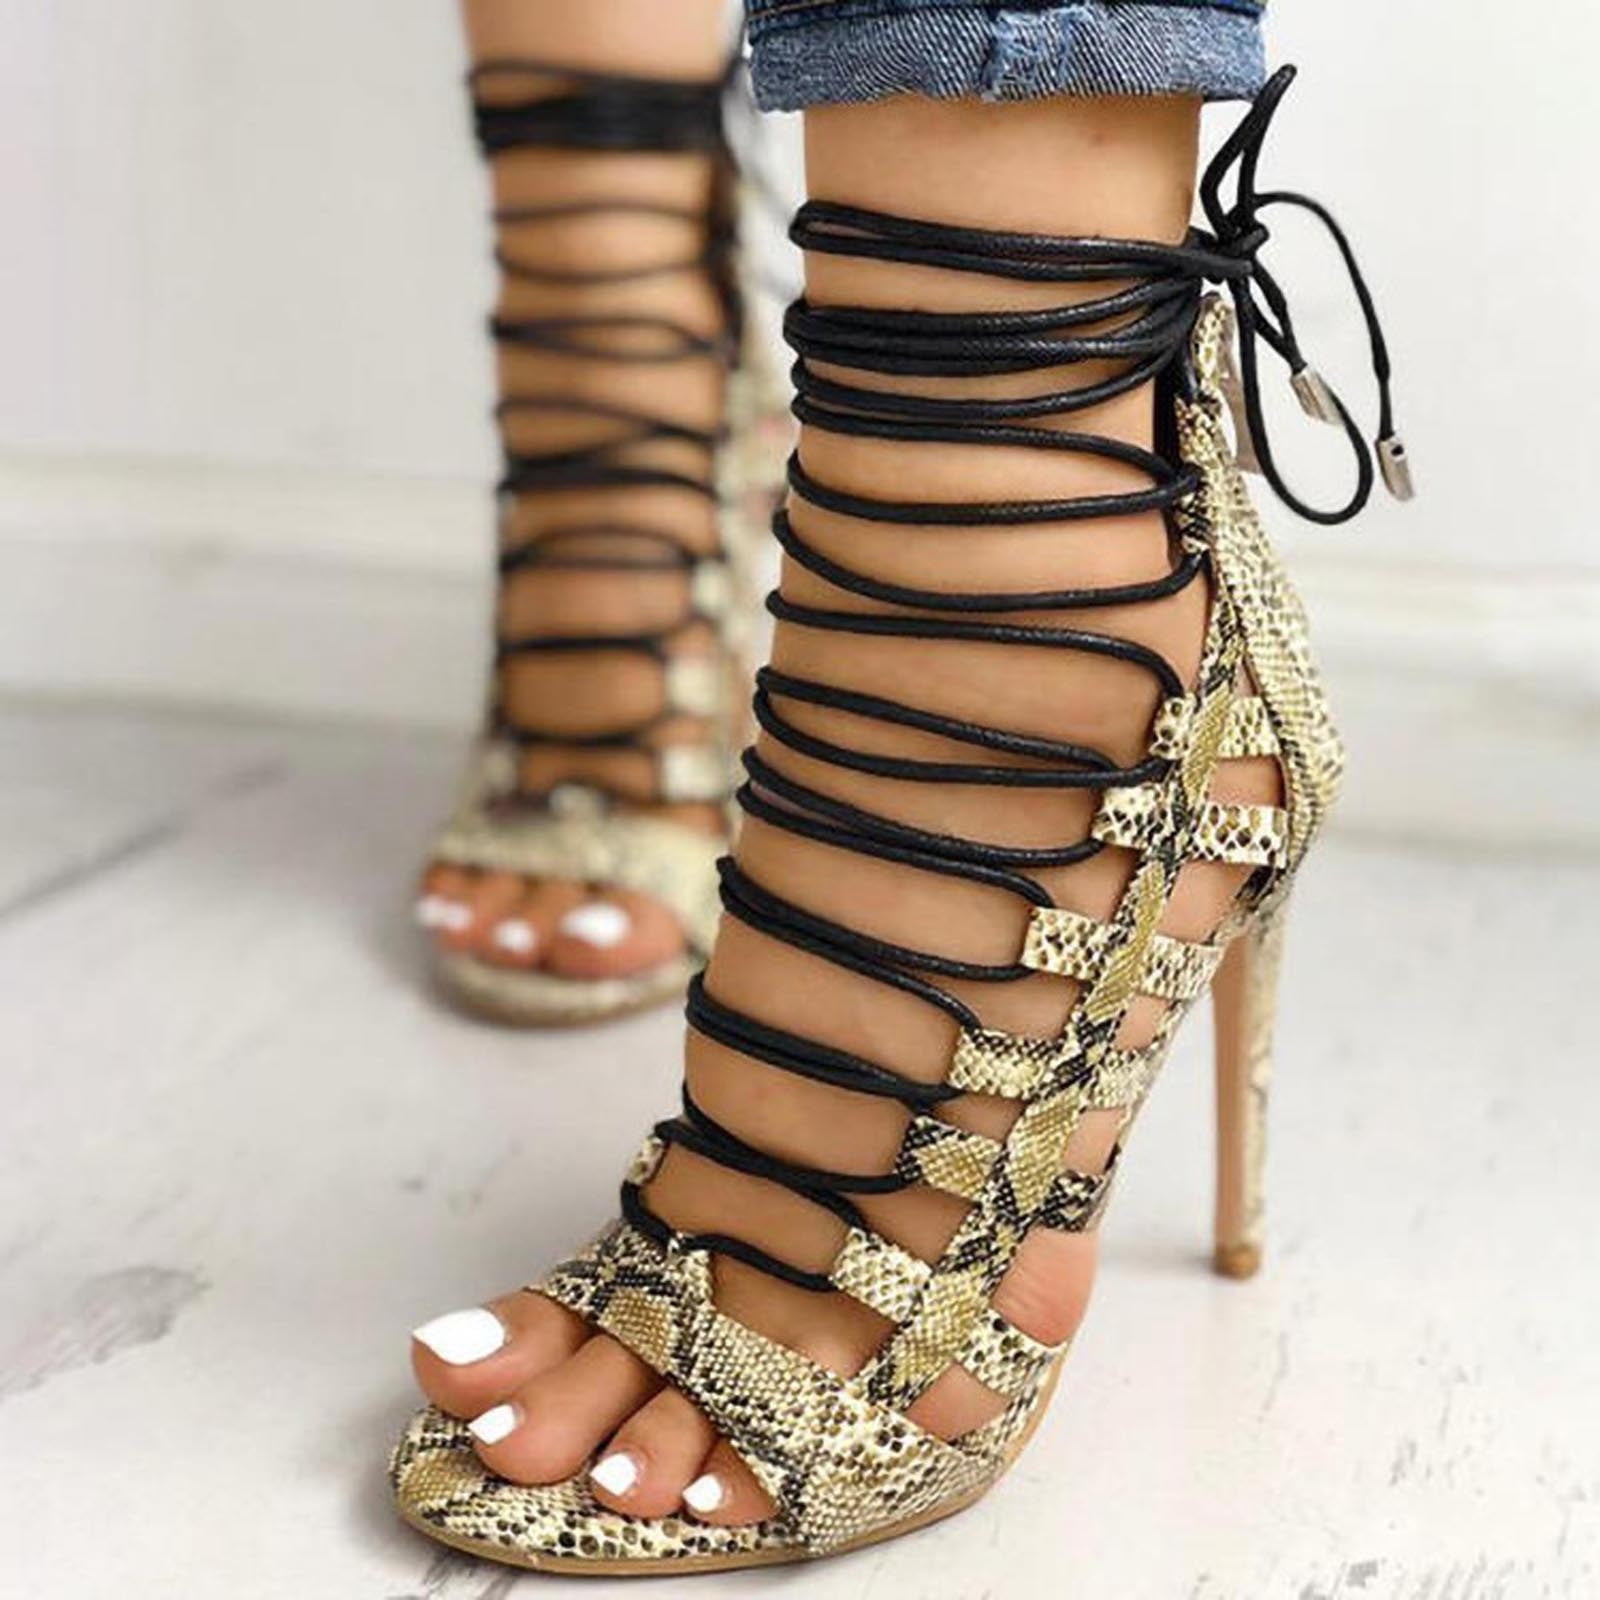 AQUAZURRA Leather Lace Up Snakeskin Strap Heels Size 38.5 Brown - $230 -  From Kitty